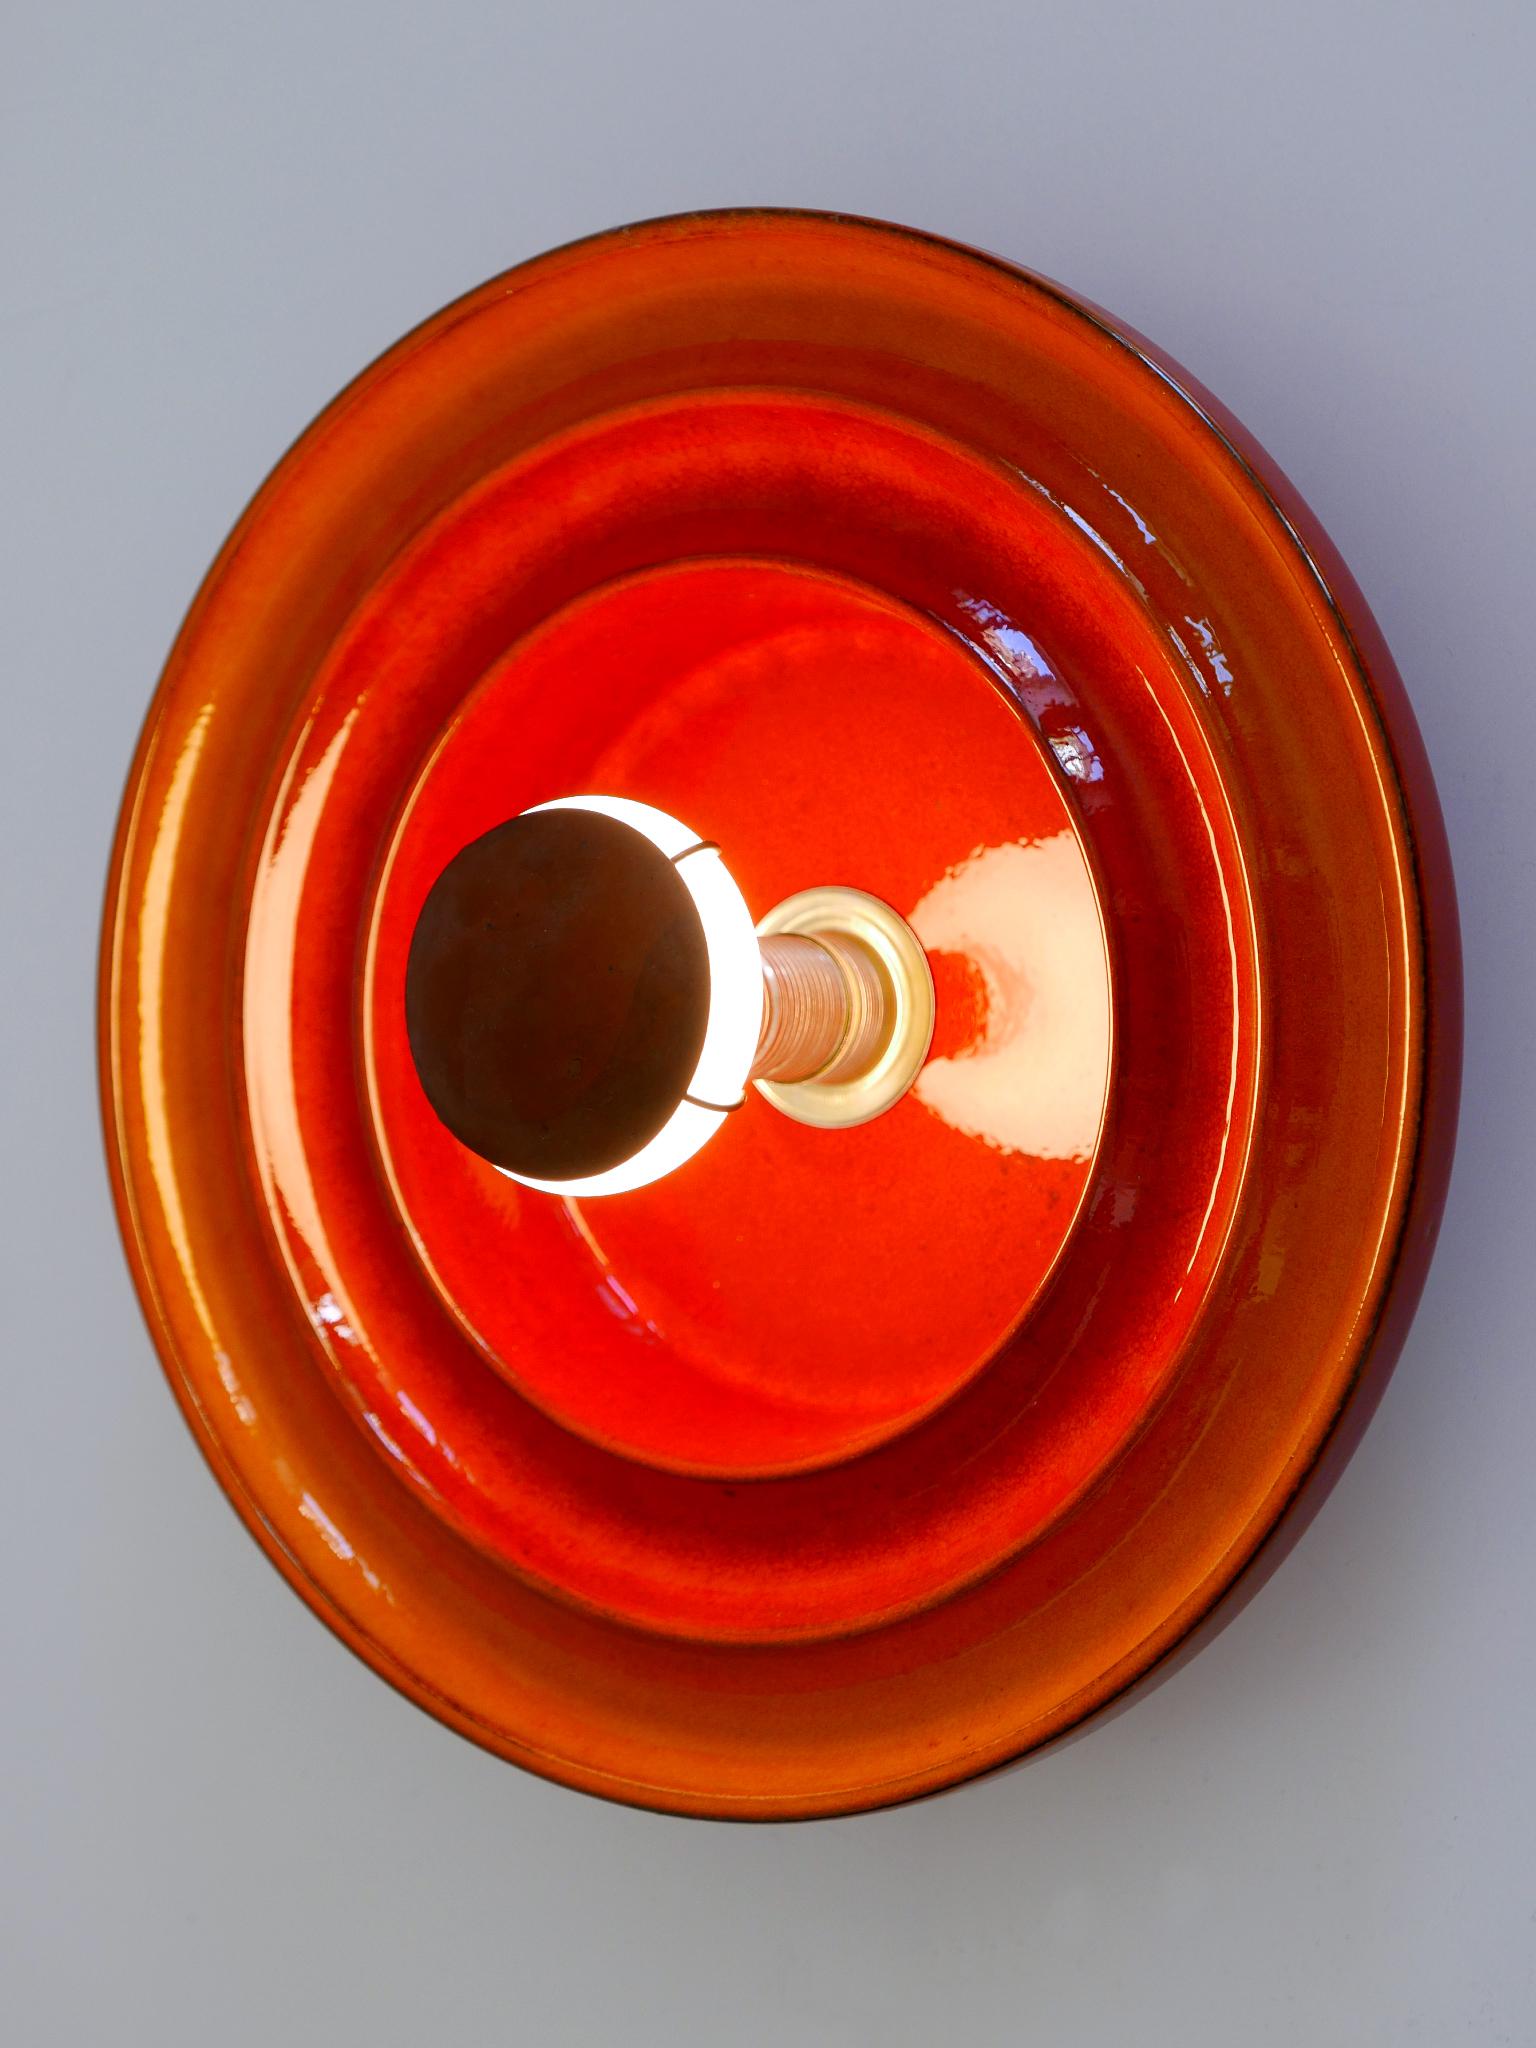 Highly Decorative Mid Century Modern Ceramic Sconce or Wall Light Germany 1960s For Sale 4